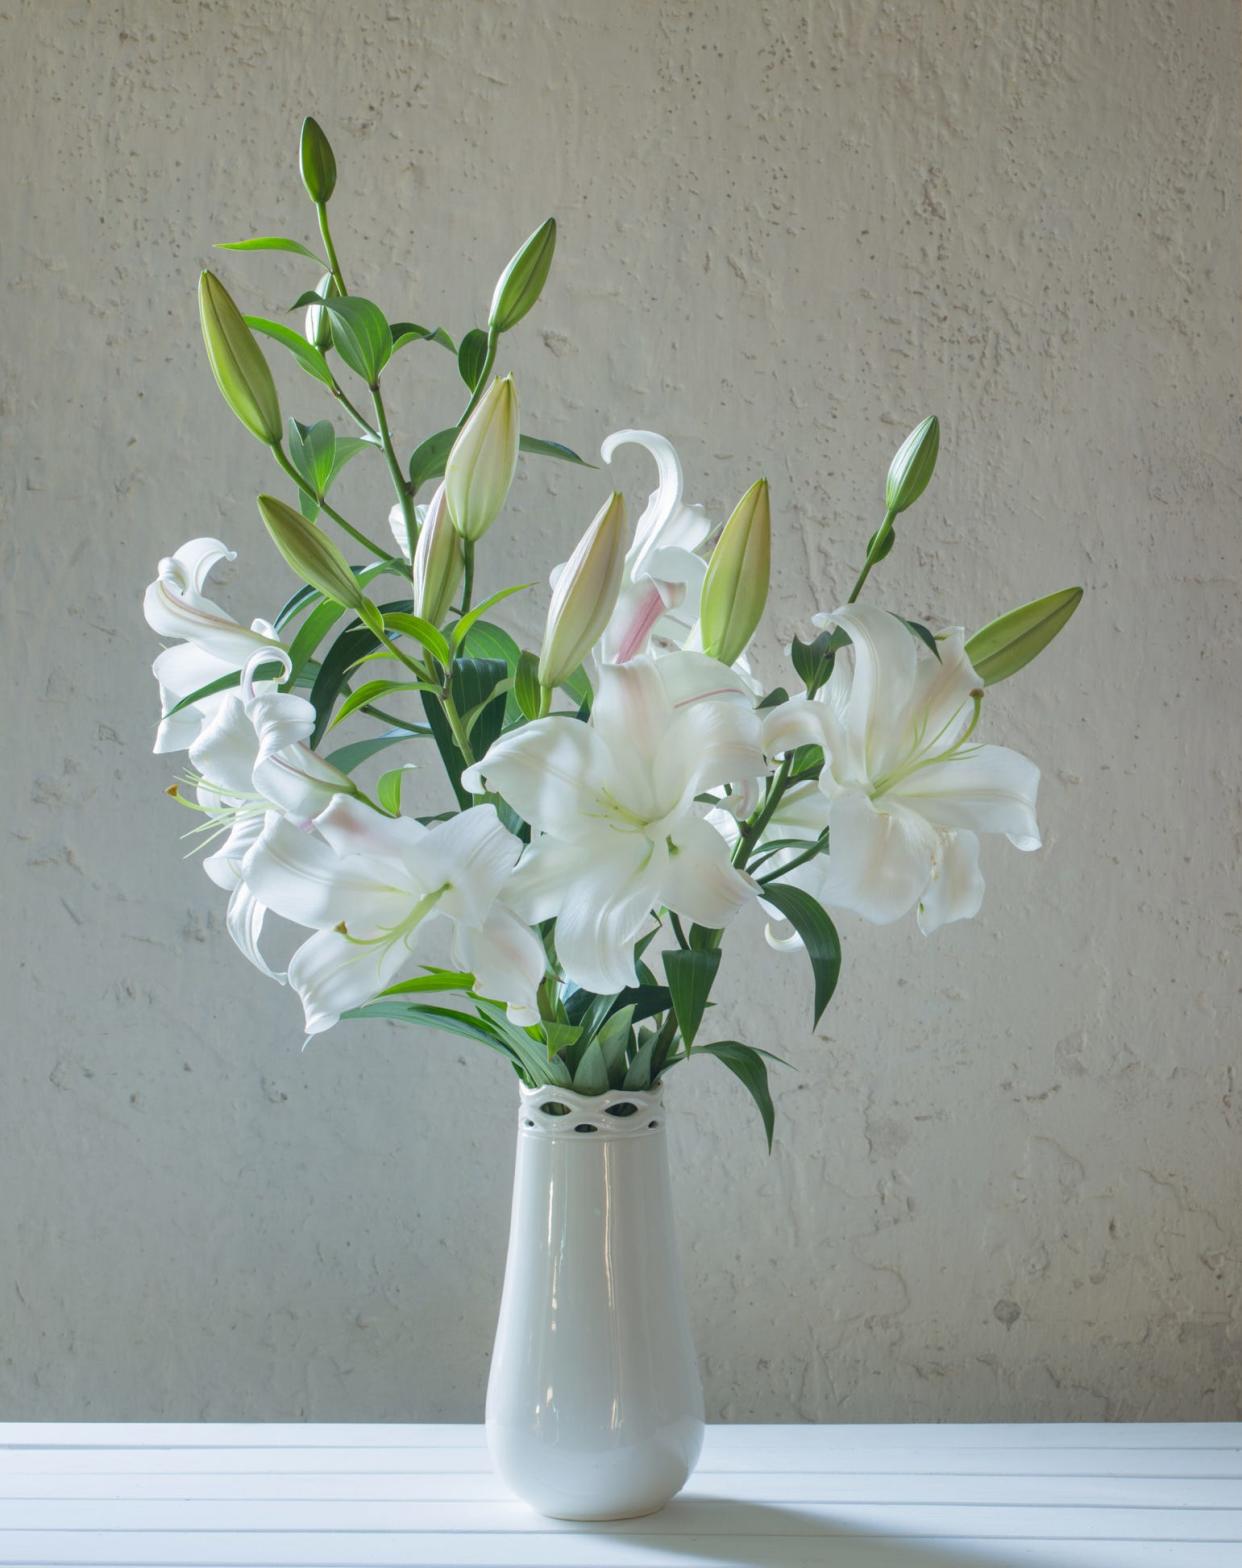 Lillies are the most popular Easter flower but are also highly toxic and potentially deadly to pets.